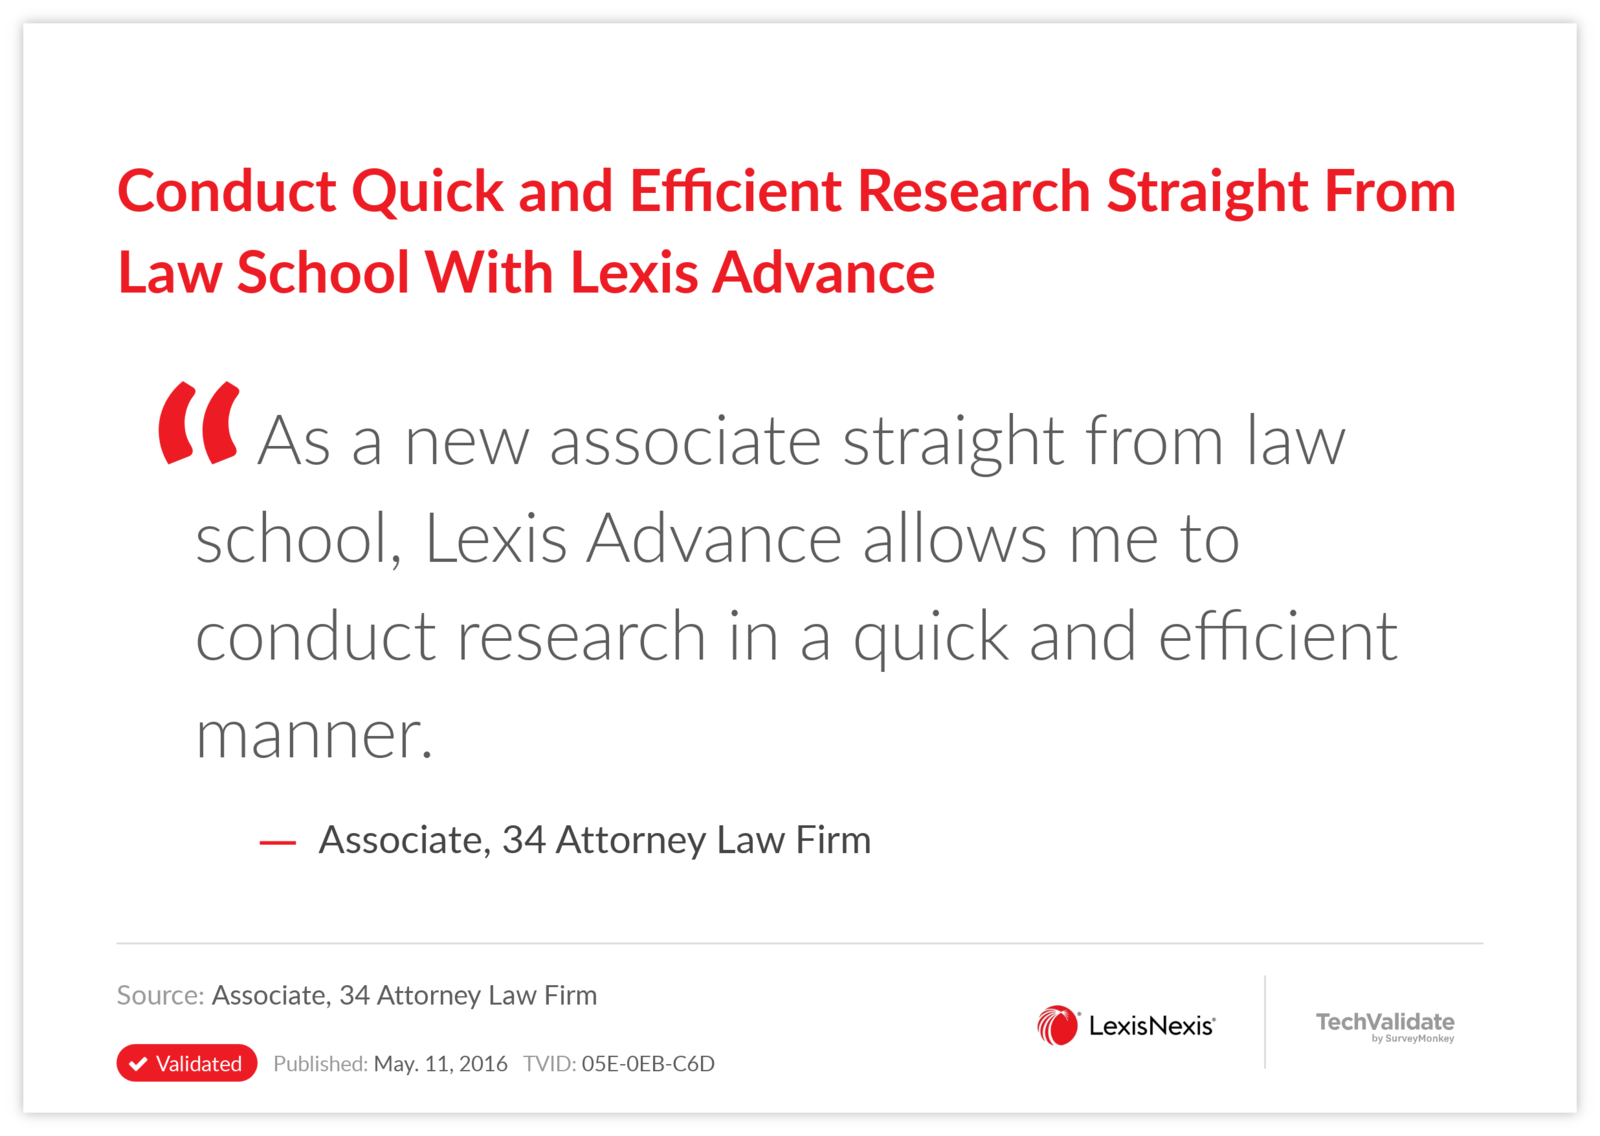 Conduct Quick and Efficient Research Straight From Law School With Lexis Advance